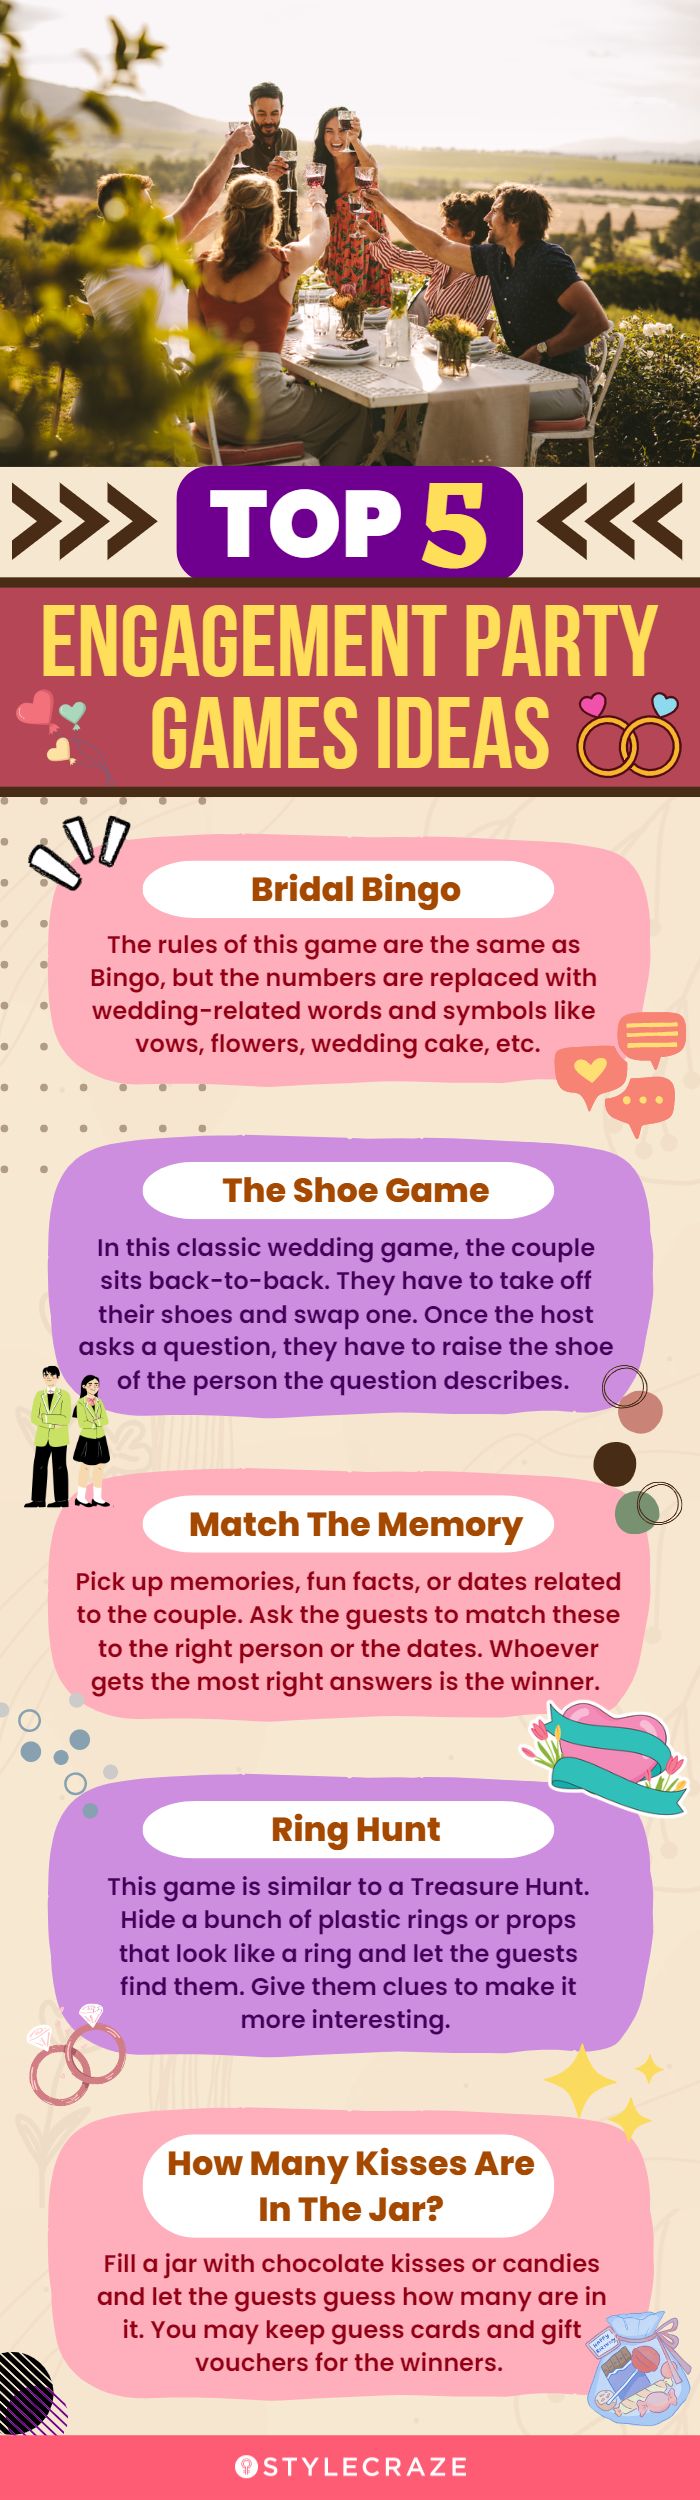 top 5 engagement party games ideas (infographic)